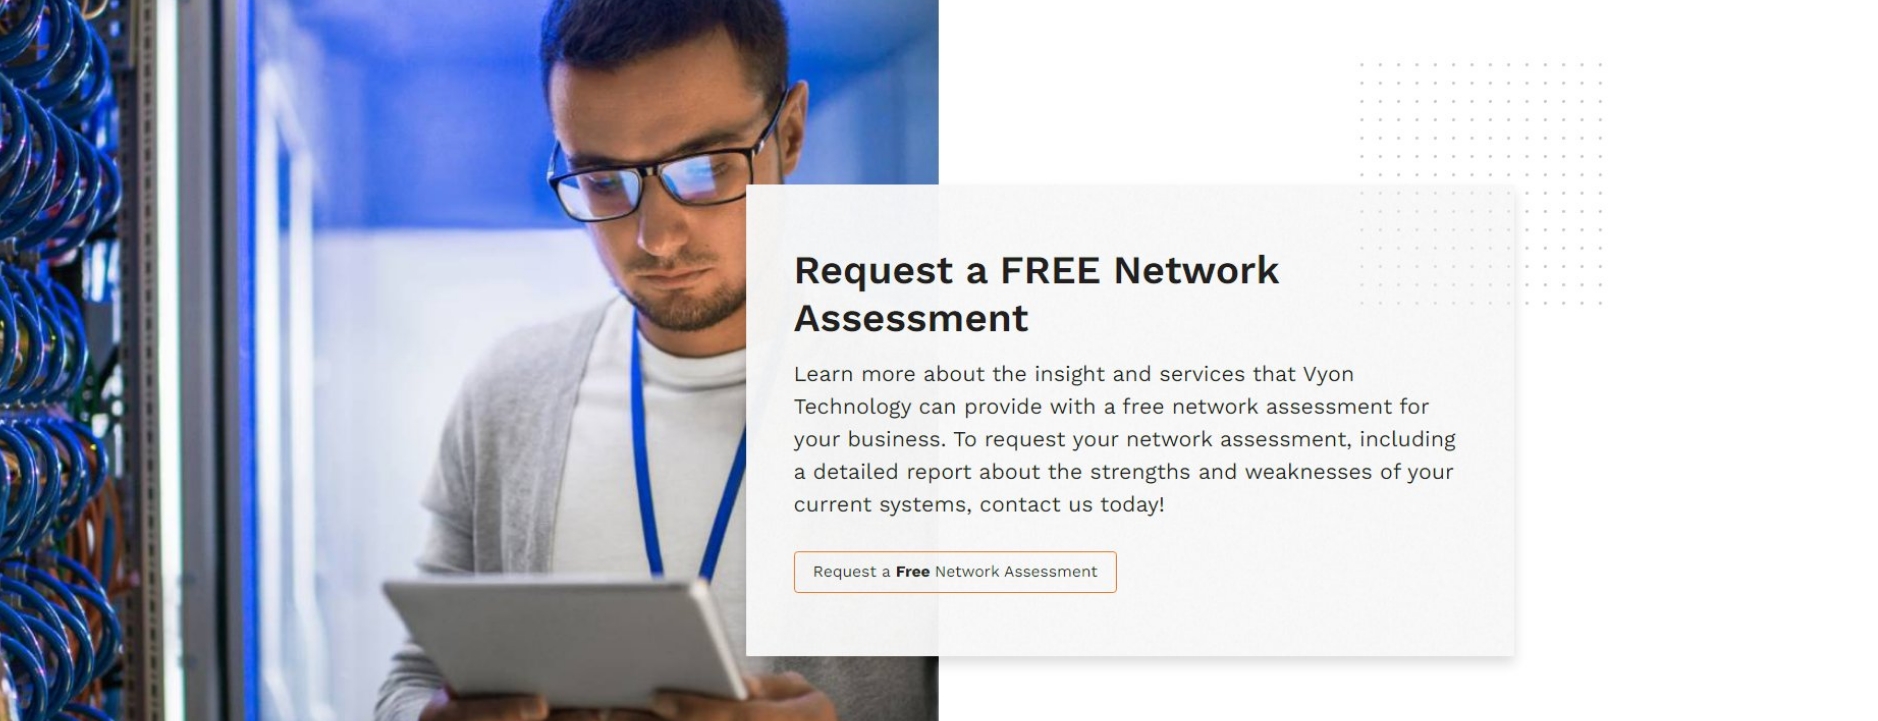 Vyon Technology network assessment page